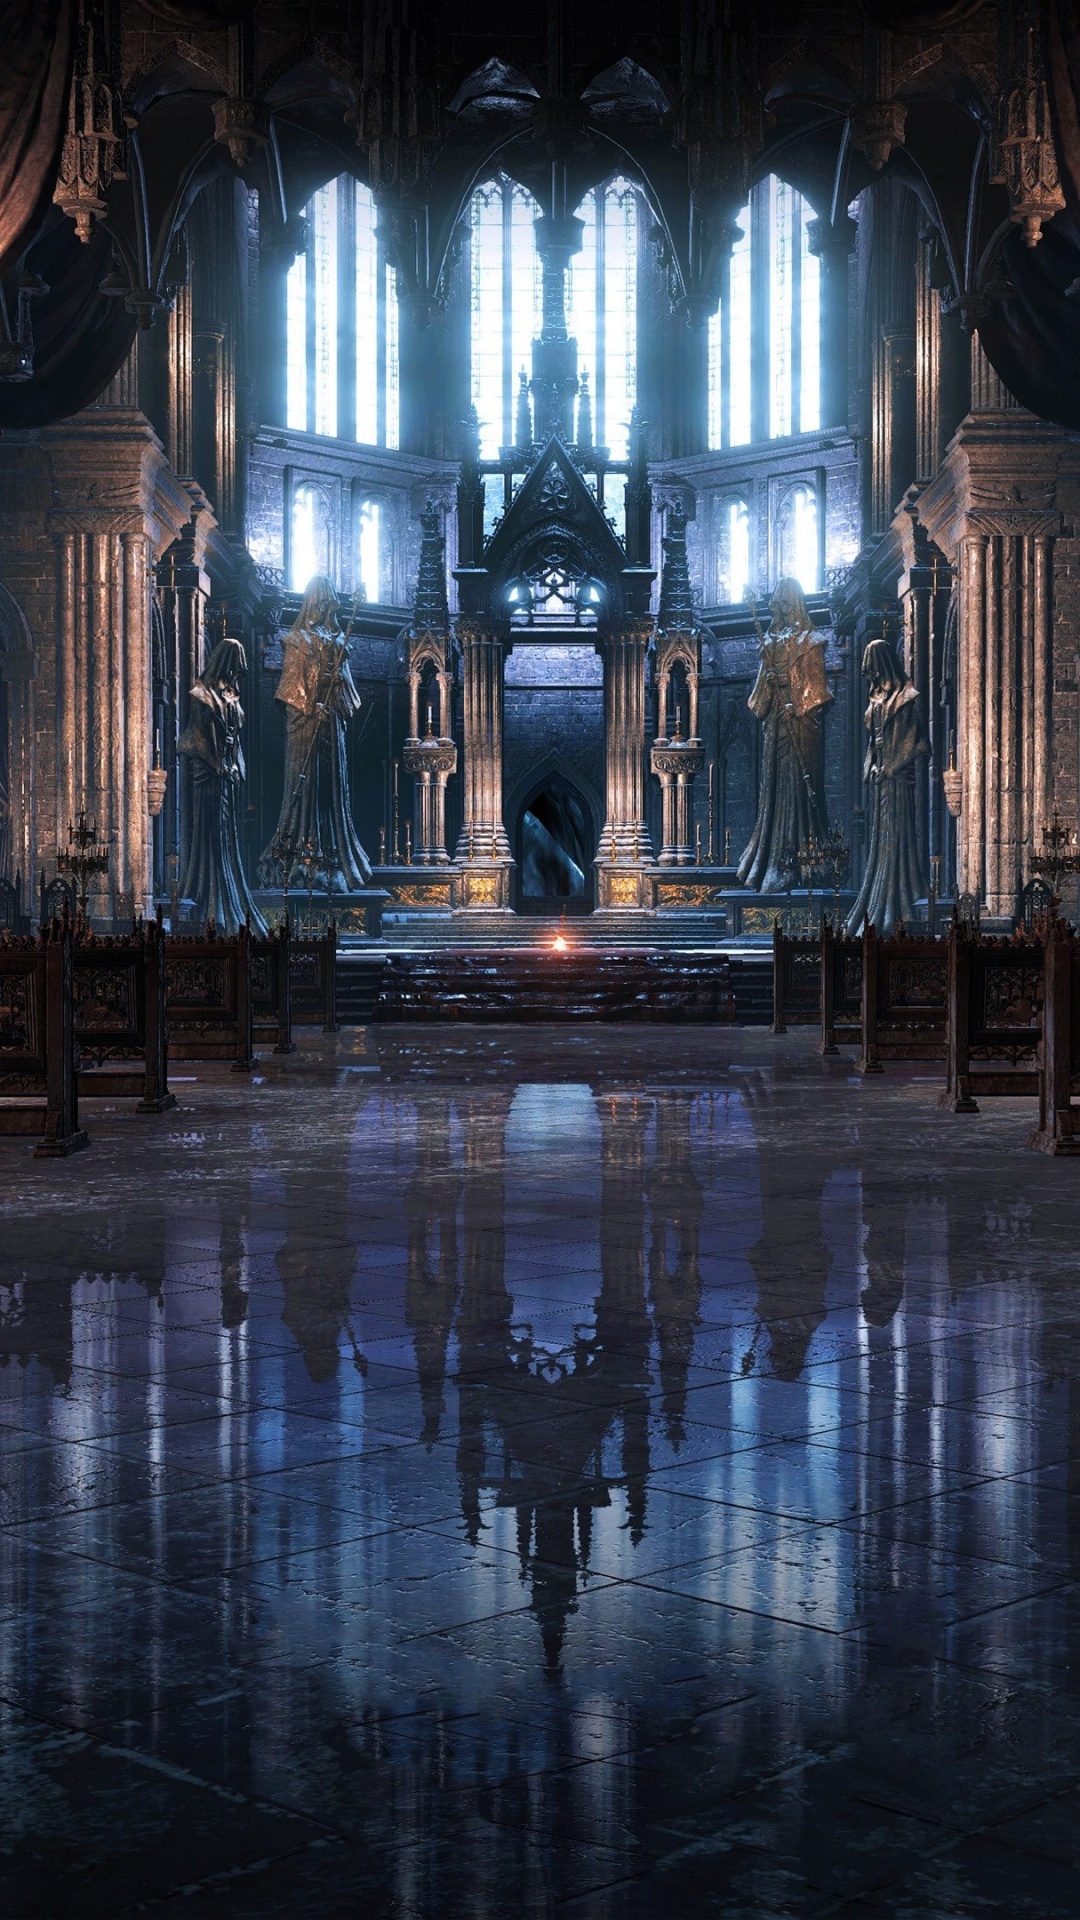 Gothic Architecture: Video game, Dark Souls III, Pointed arches, Cathedral, Interior, Altar, Statues. 1080x1920 Full HD Wallpaper.